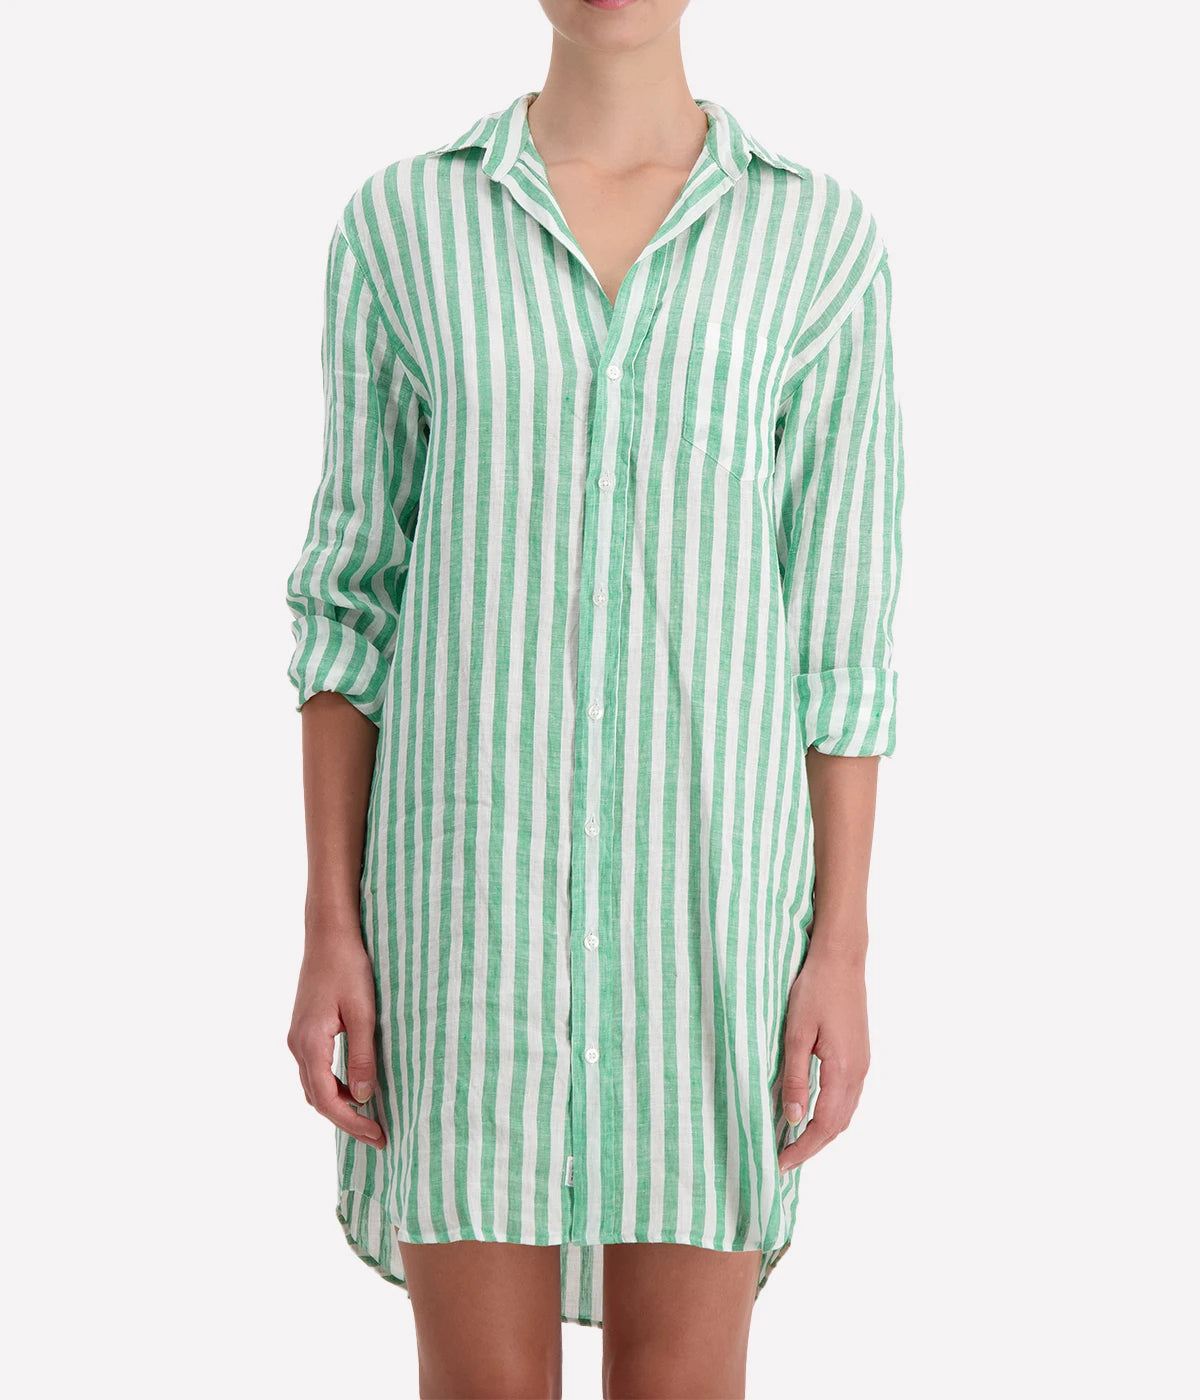 Mary Classic Shirtdress in Green Stripe Classic Linen